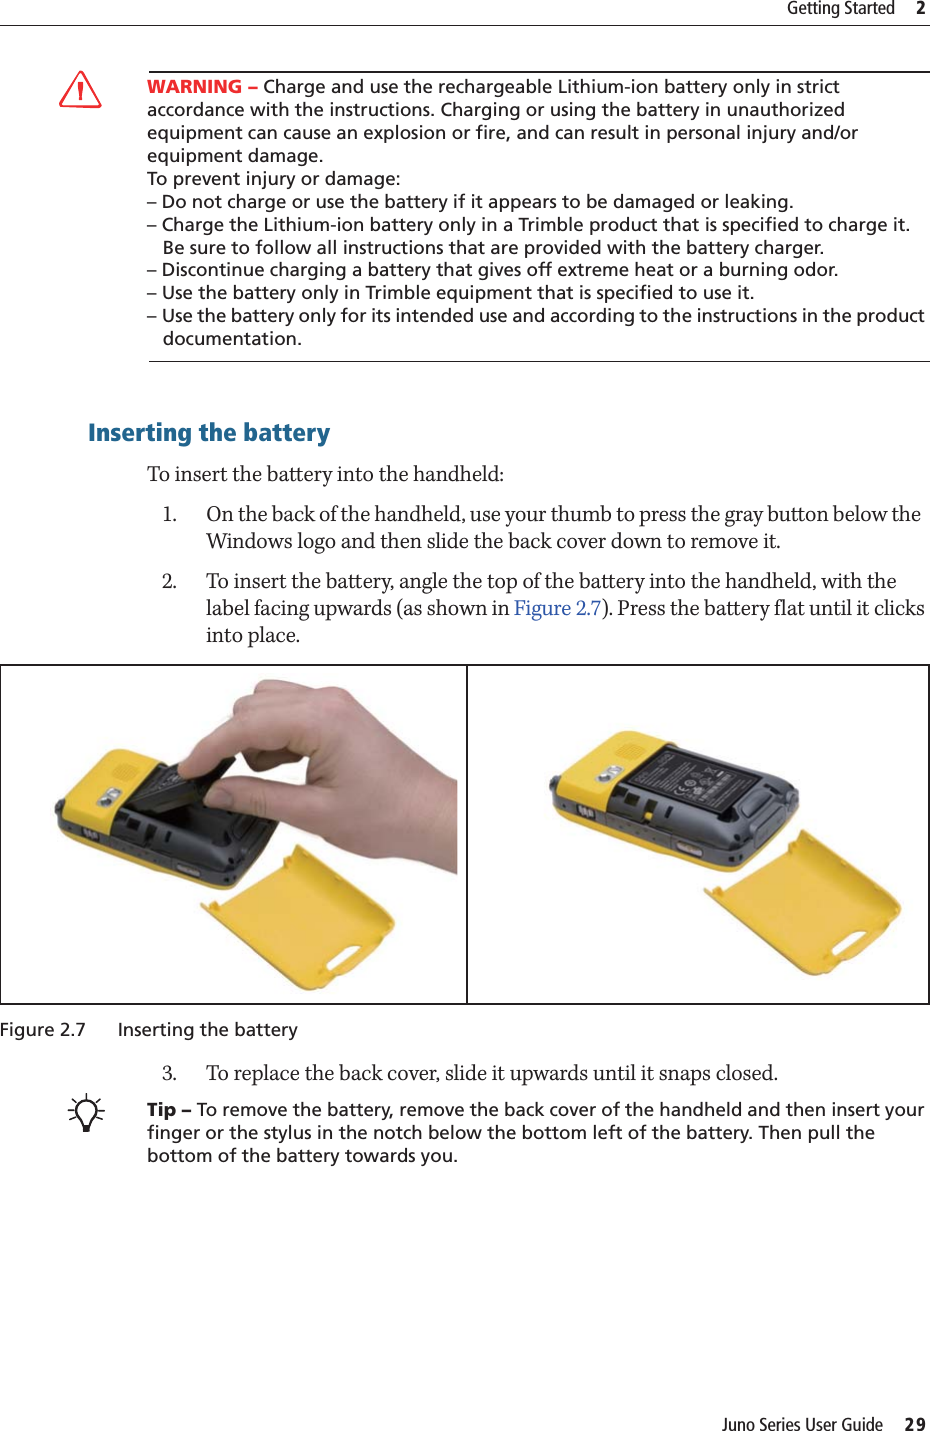 Juno Series User Guide     29Getting Started     2CWARNING – Charge and use the rechargeable Lithium-ion battery only in strict accordance with the instructions. Charging or using the battery in unauthorized equipment can cause an explosion or fire, and can result in personal injury and/or equipment damage. To prevent injury or damage: – Do not charge or use the battery if it appears to be damaged or leaking.– Charge the Lithium-ion battery only in a Trimble product that is specified to charge it.    Be sure to follow all instructions that are provided with the battery charger. – Discontinue charging a battery that gives off extreme heat or a burning odor.– Use the battery only in Trimble equipment that is specified to use it. – Use the battery only for its intended use and according to the instructions in the product    documentation.Inserting the batteryTo insert the battery into the handheld:1. On the back of the handheld, use your thumb to press the gray button below the  Windows logo and then slide the back cover down to remove it. 2. To insert the battery, angle the top of the battery into the handheld, with the label facing upwards (as shown in Figure 2.7). Press the battery flat until it clicks into place.Figure 2.7 Inserting the battery3. To replace the back cover, slide it upwards until it snaps closed.BTip – To remove the battery, remove the back cover of the handheld and then insert your finger or the stylus in the notch below the bottom left of the battery. Then pull the bottom of the battery towards you.